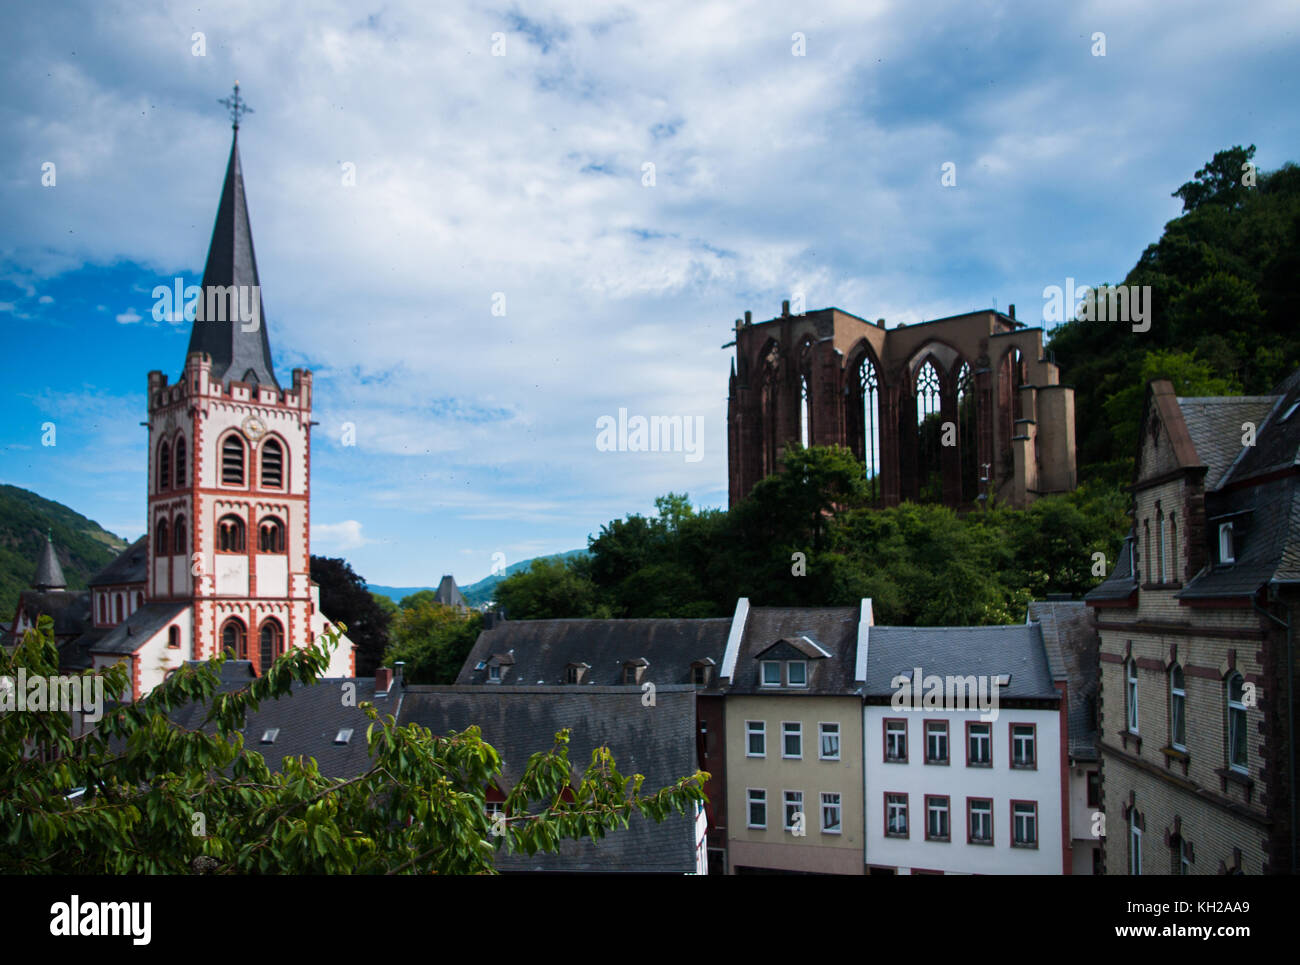 Bacharach located in Germany Stock Photo